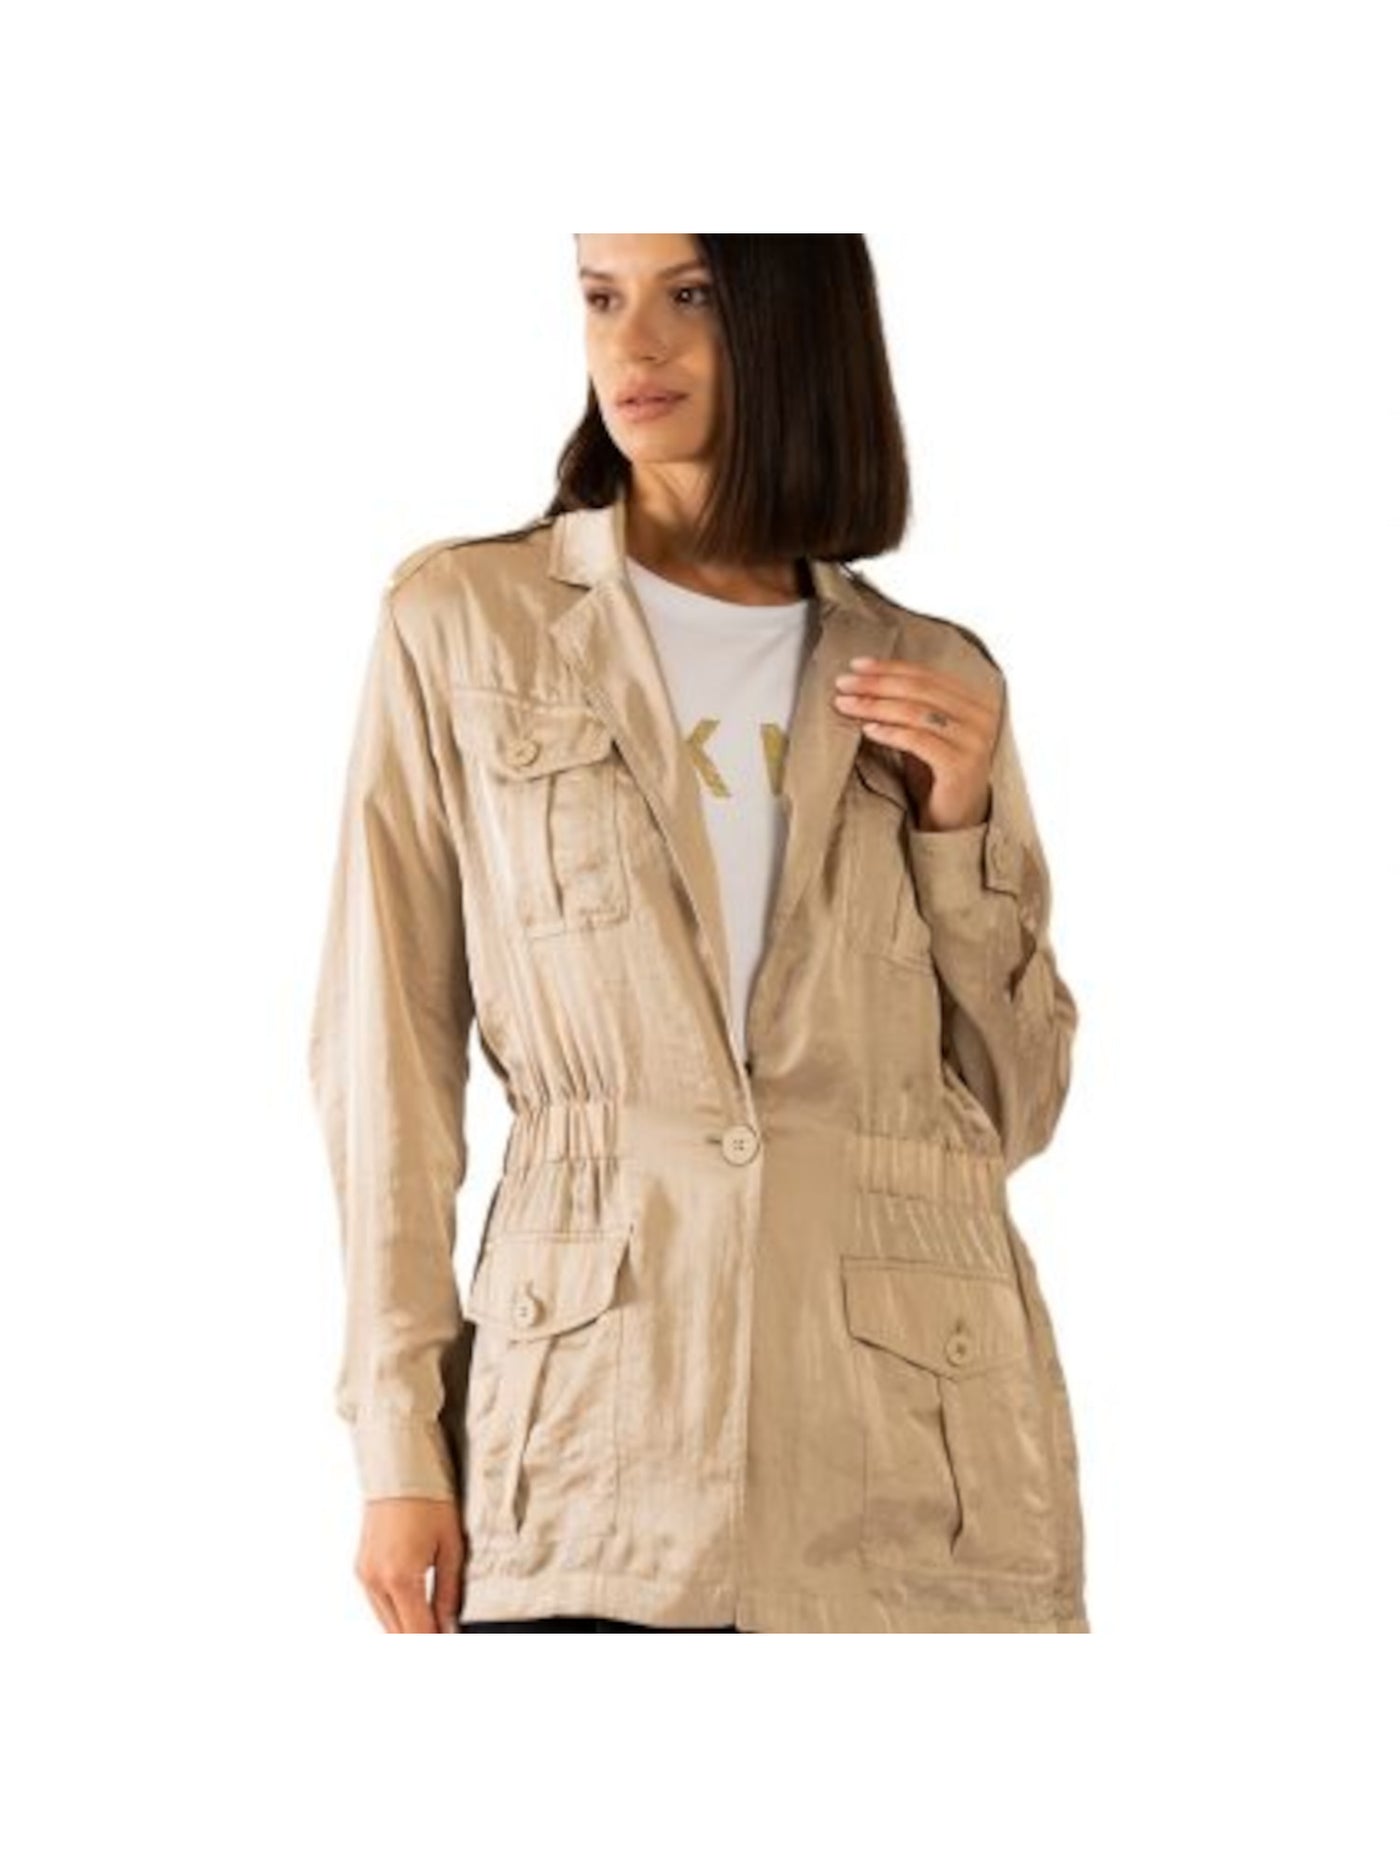 DKNY Womens Gold Pocketed Utility Unlined Button Front Jacket XL